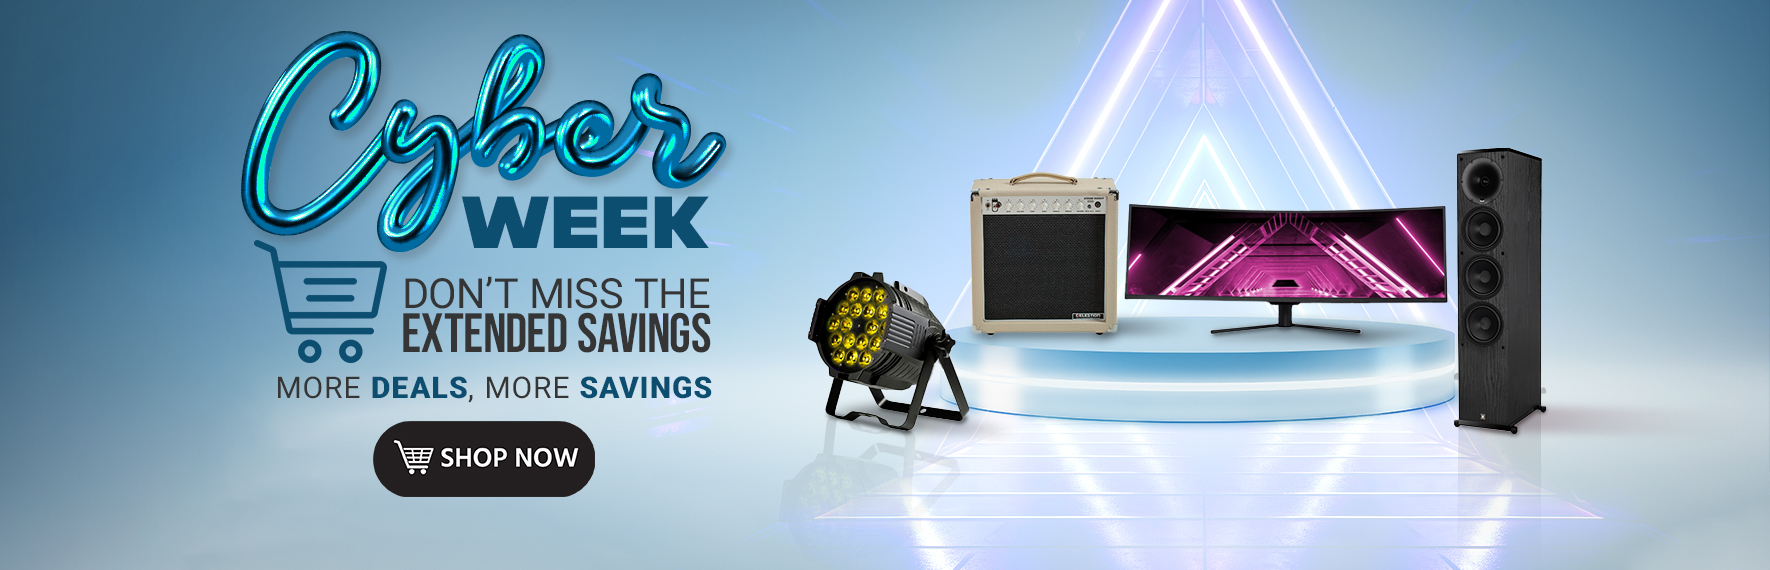 Cyber Week: Don’t Miss the Extended Savings More Deals, More Savings Shop Now